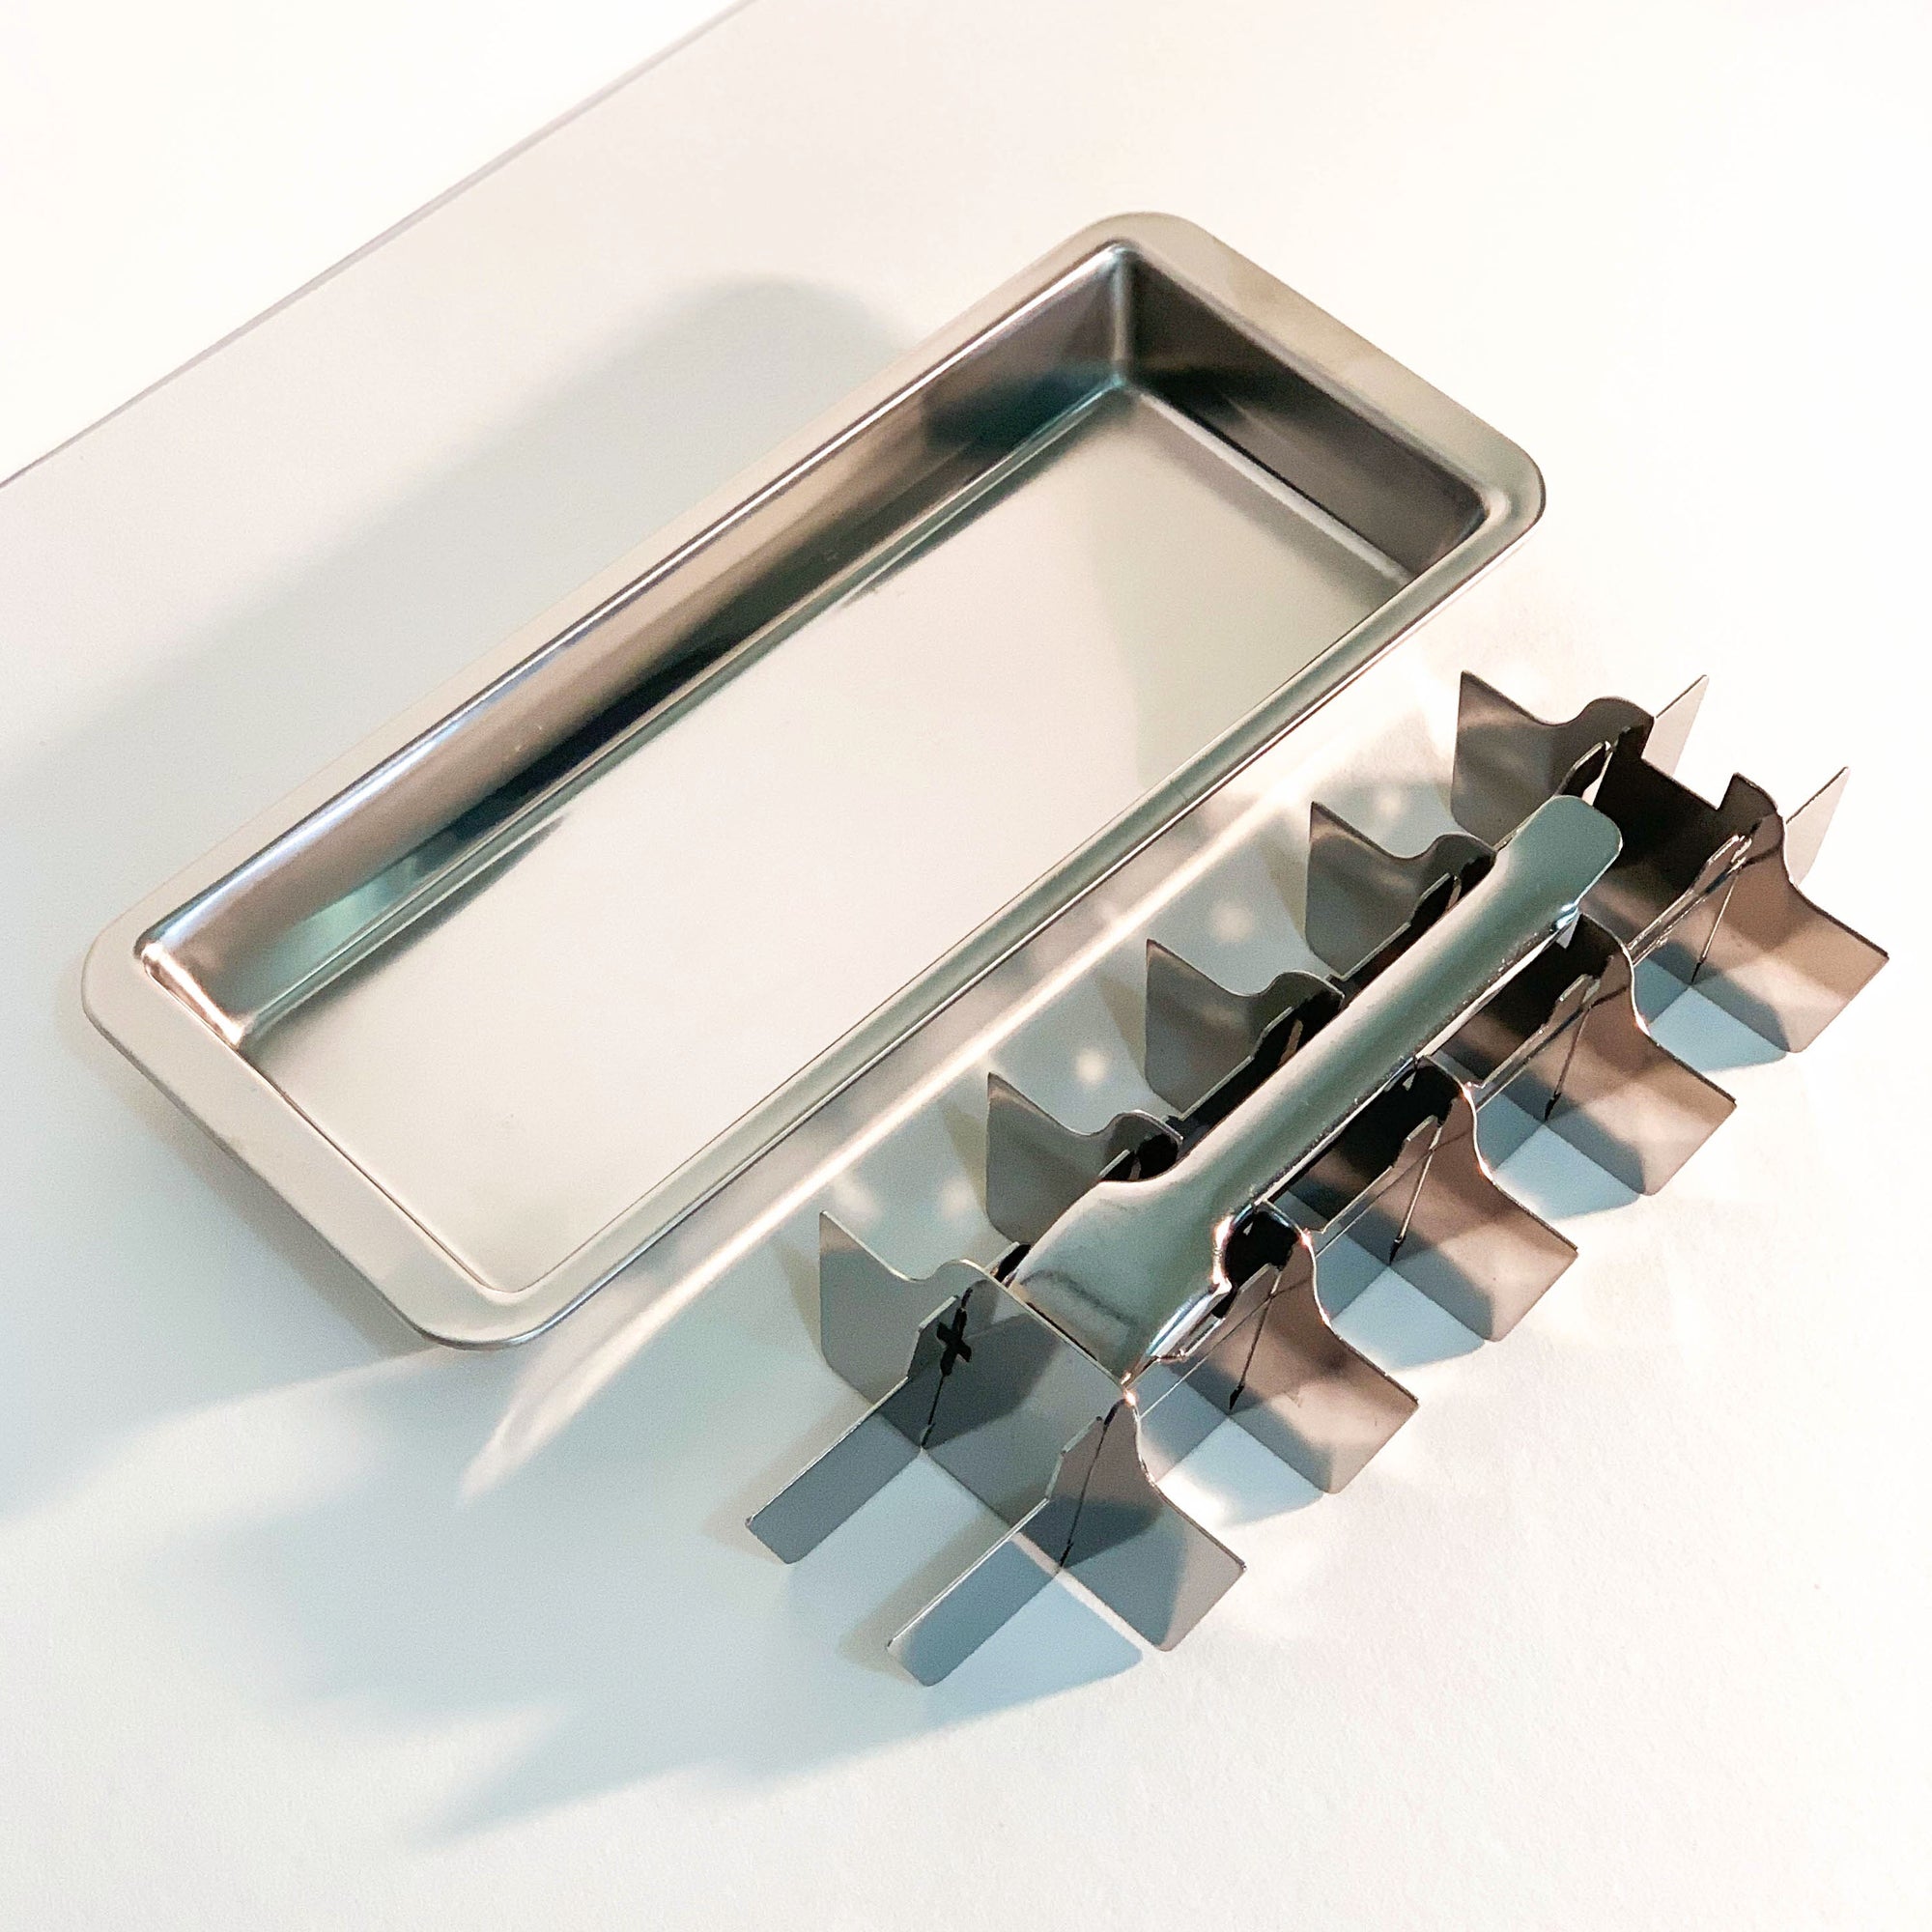 STAINLESS STEEL ICE TRAY